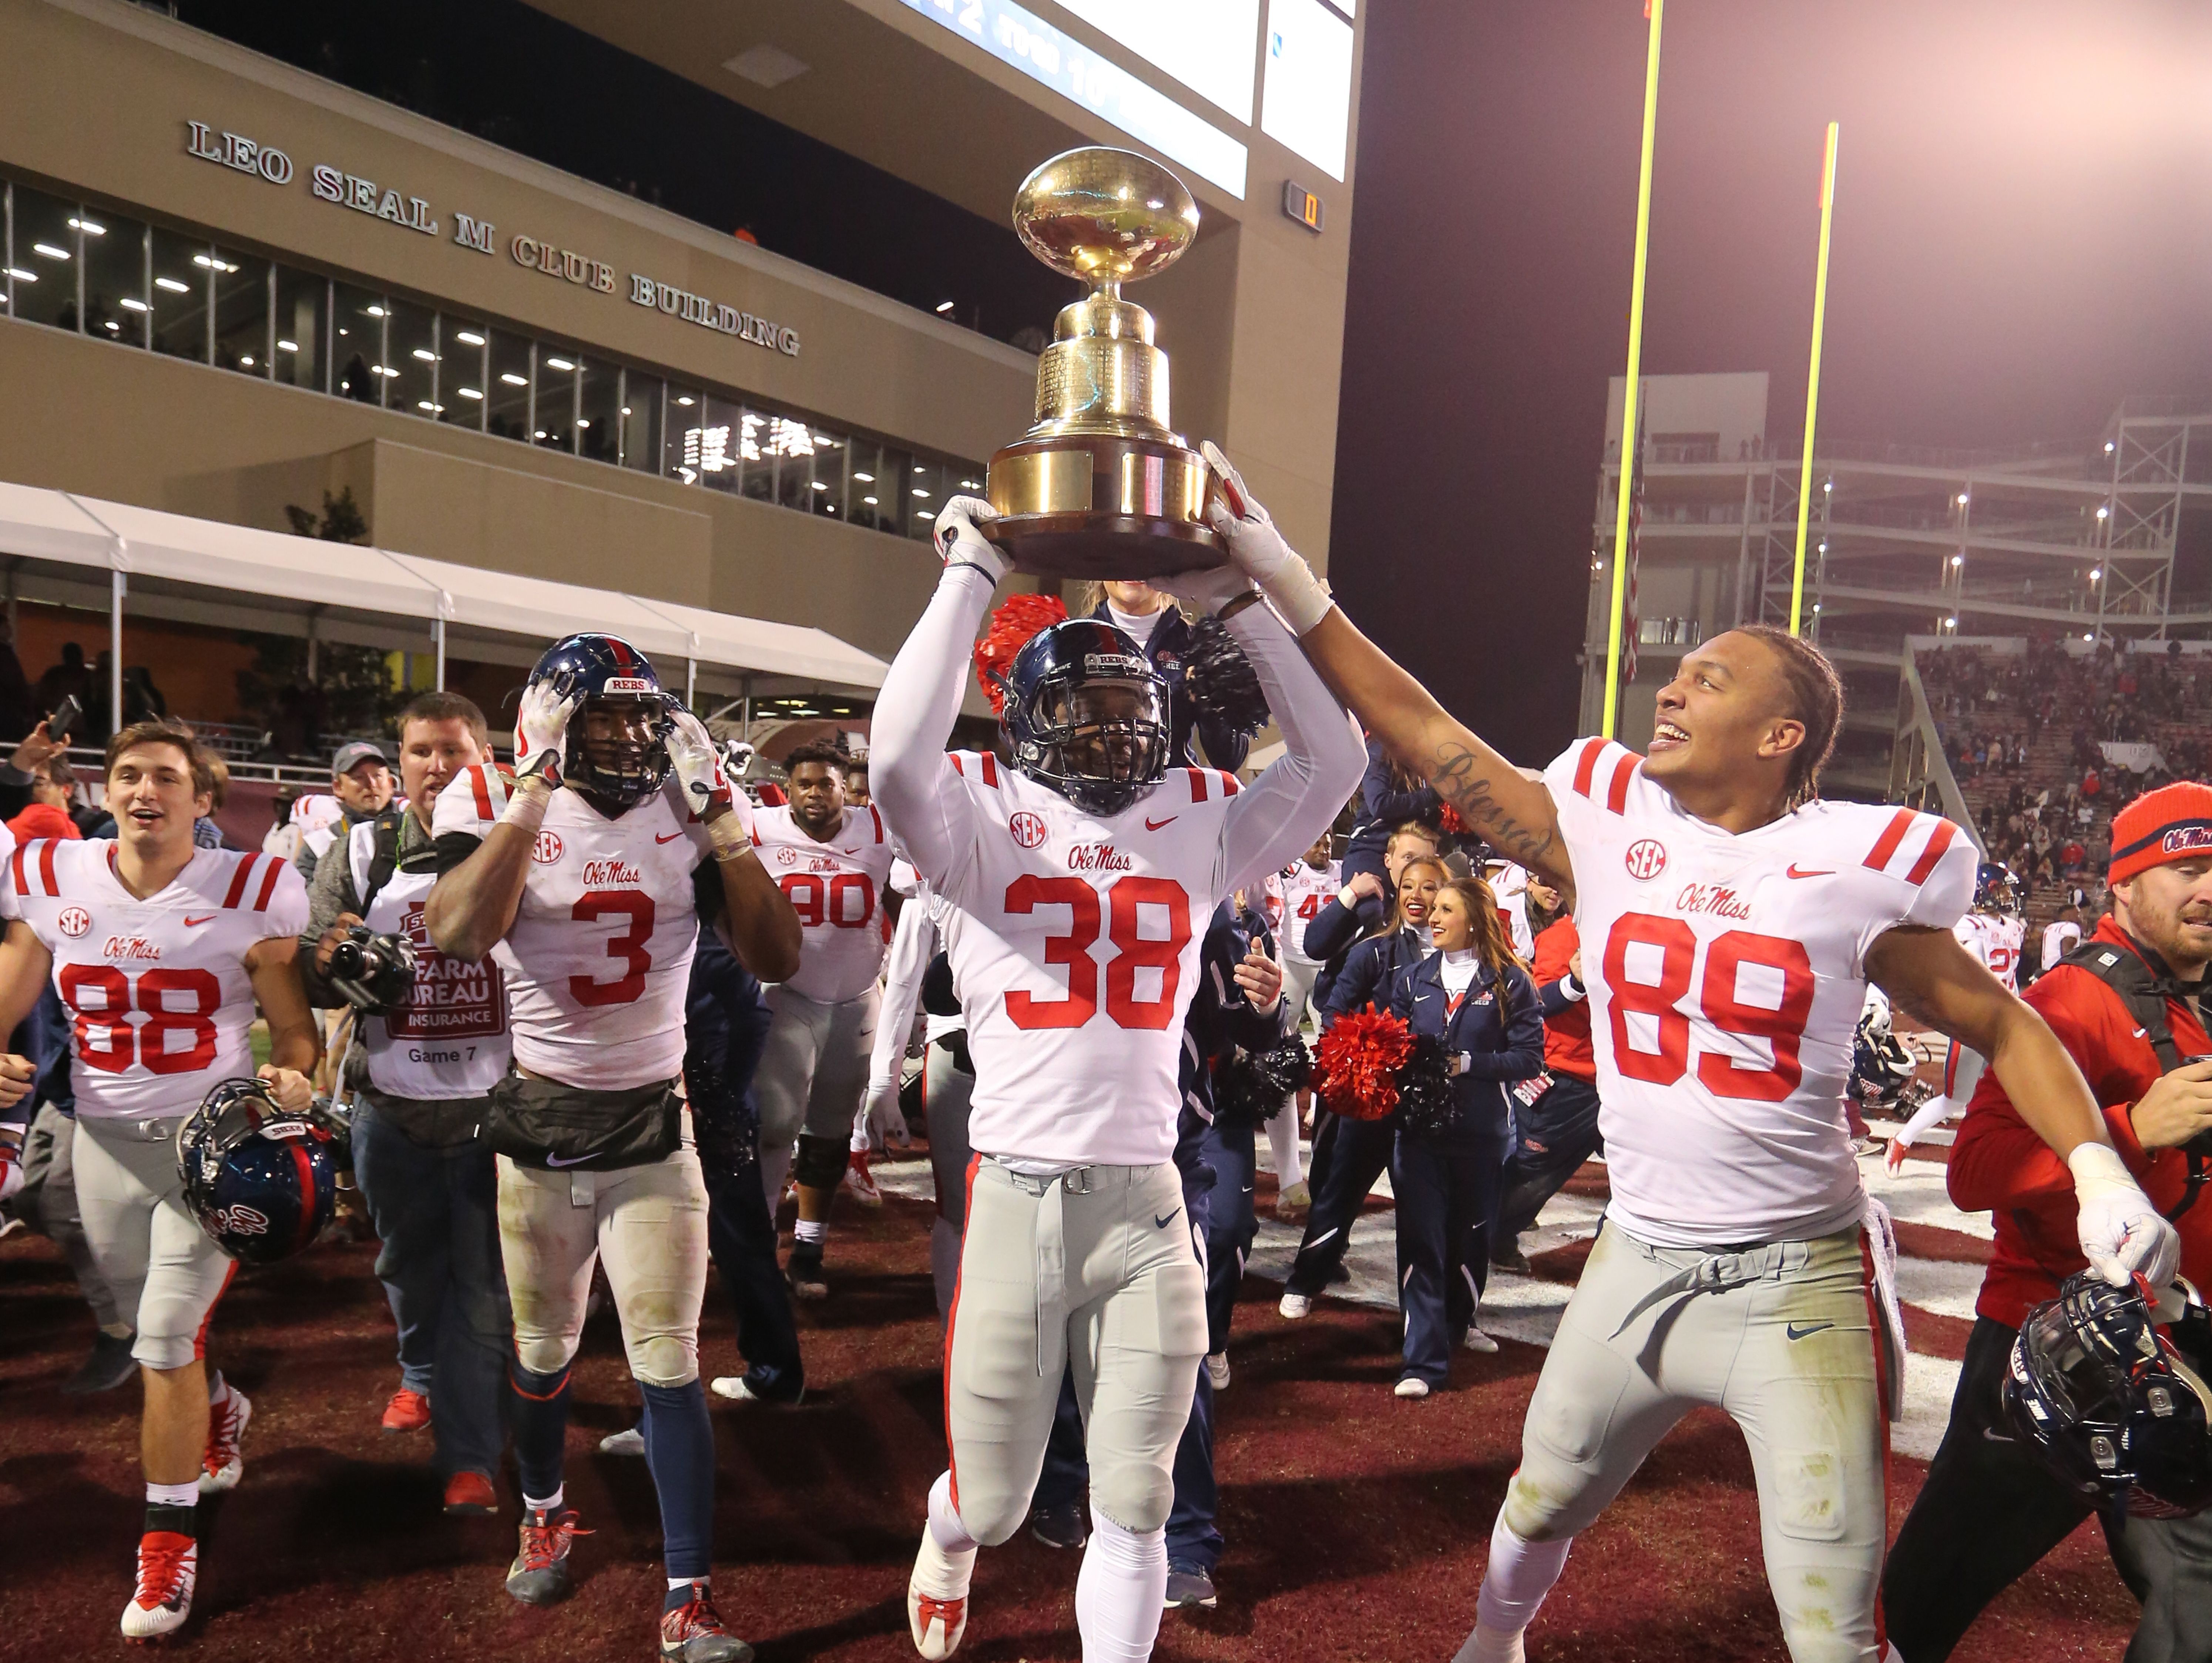 One night only Ole Miss celebrates Egg Bowl win by embracing the